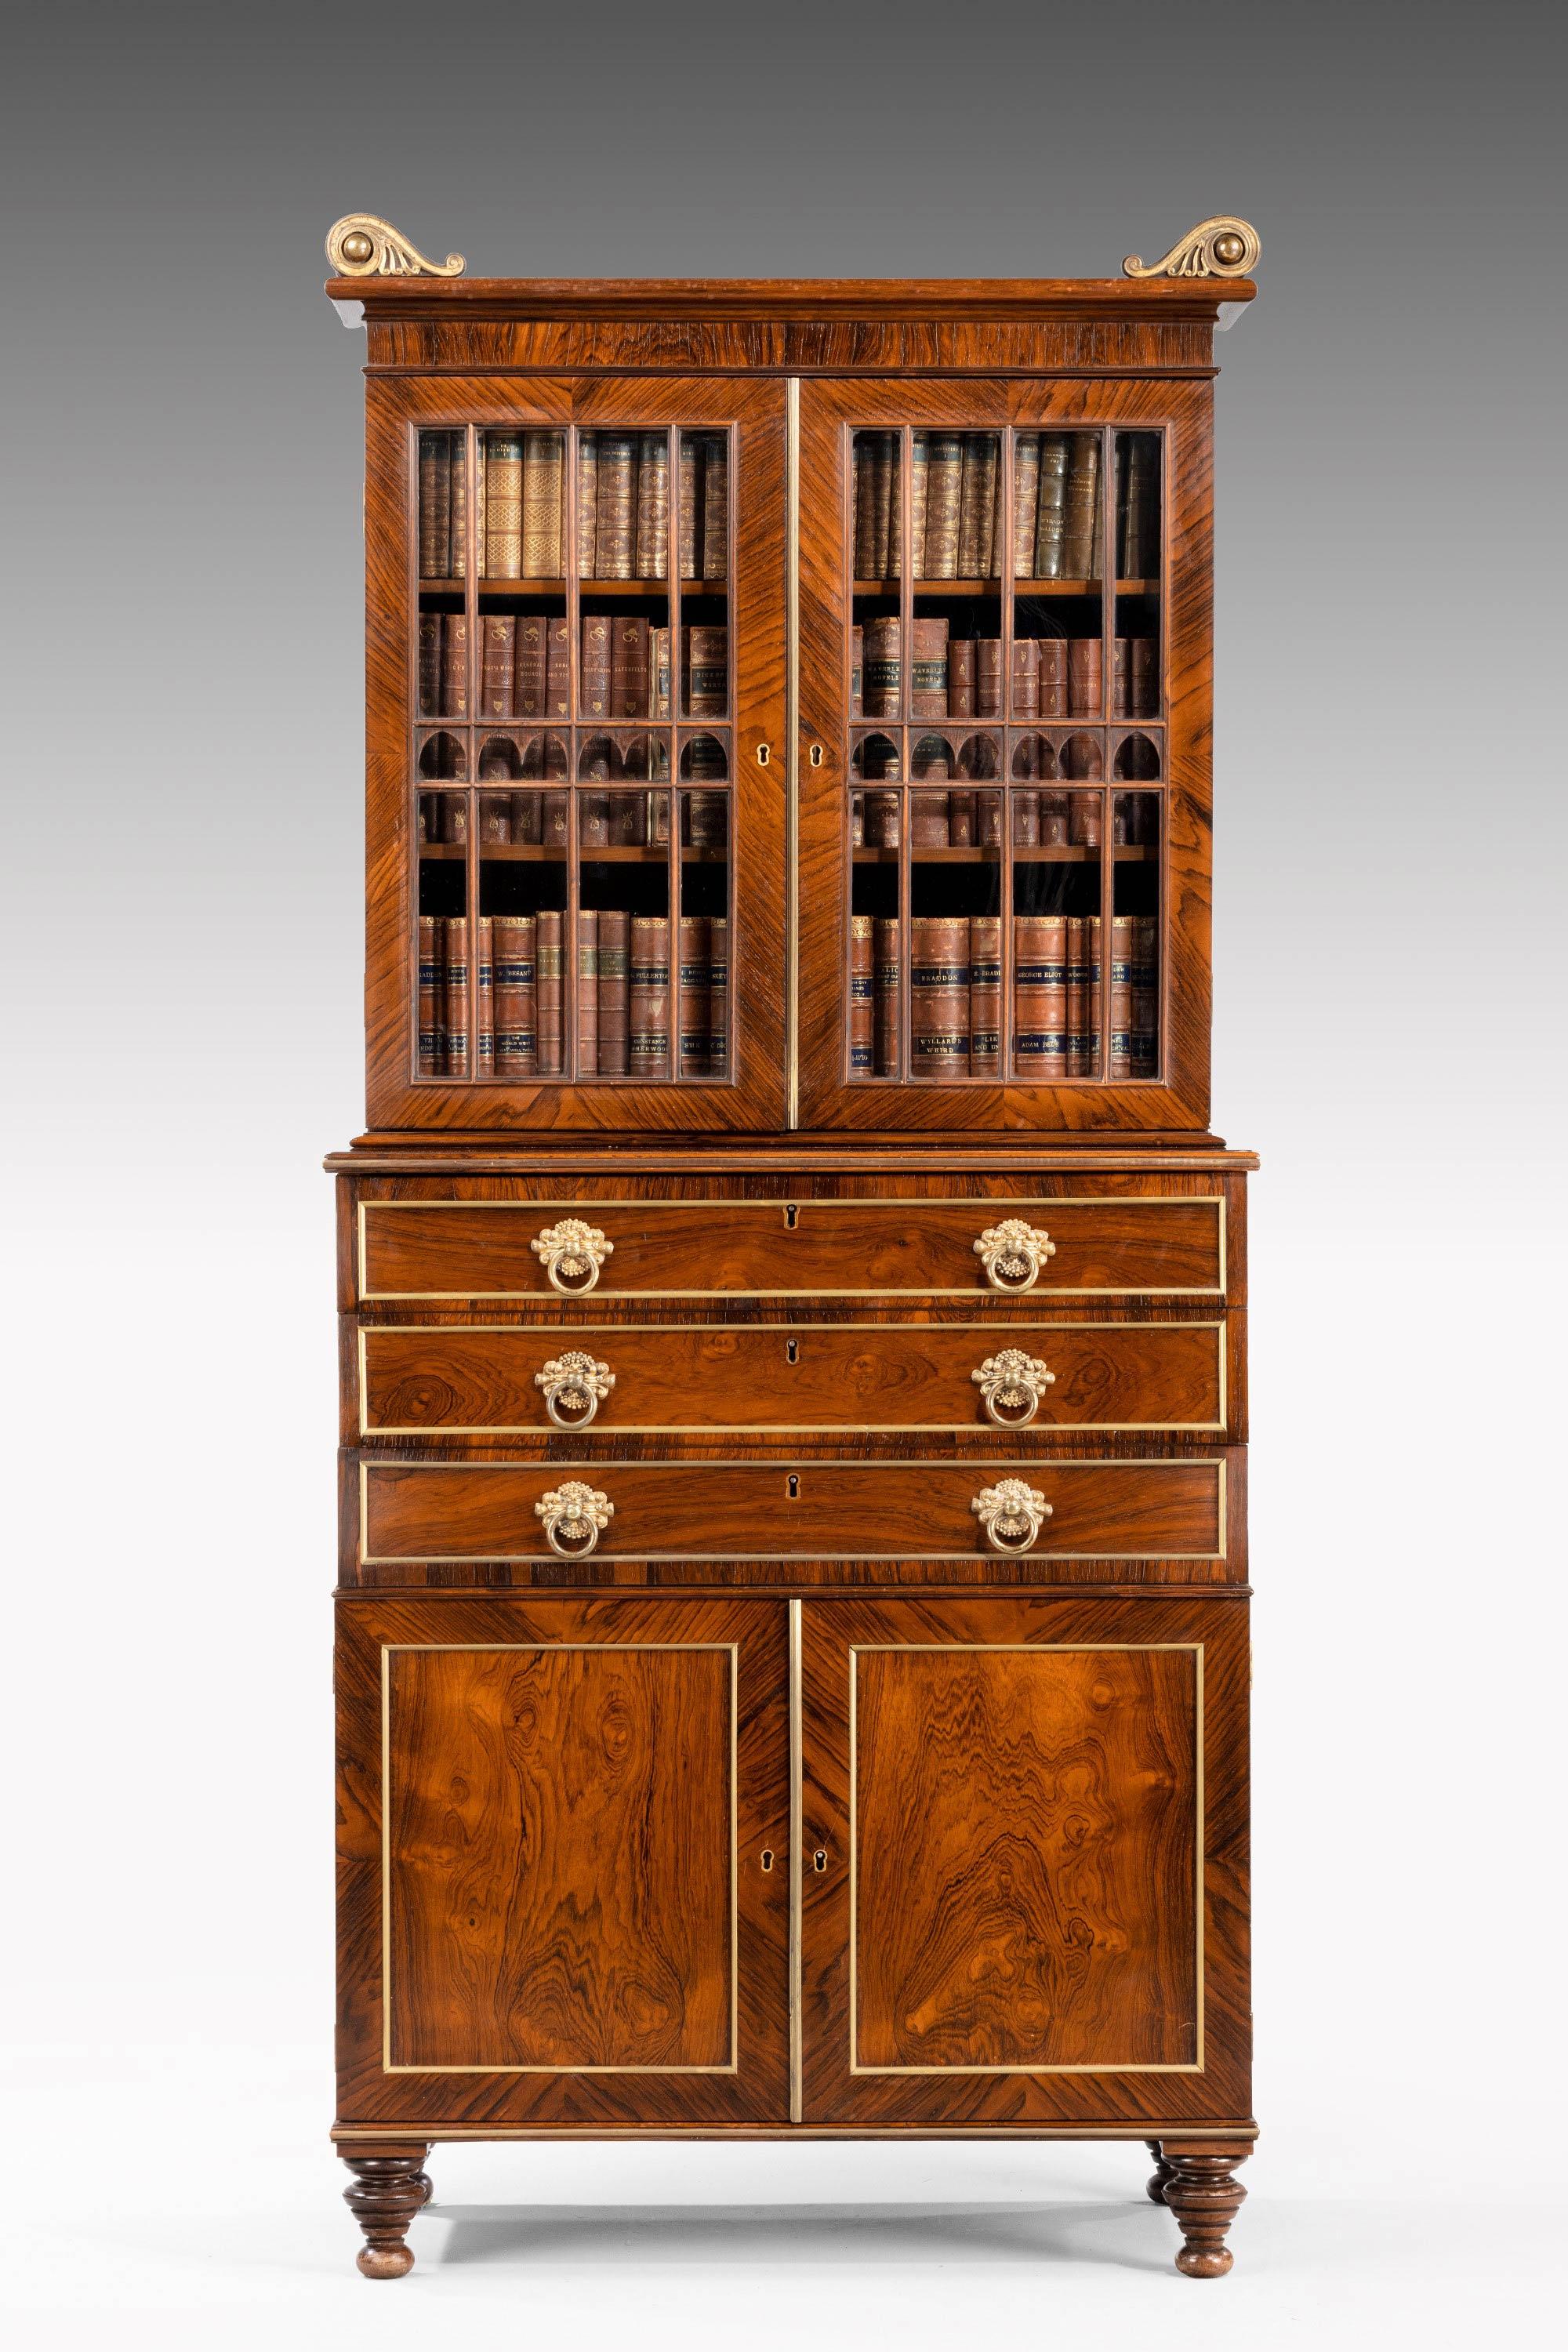 A fine and small Regency period rosewood three-drawer bookcase of wonderful quality. Retaining the original cast scrolled detailing to the pediment. Arched Gothic wooden glazing bars to the top,
circa 1810.